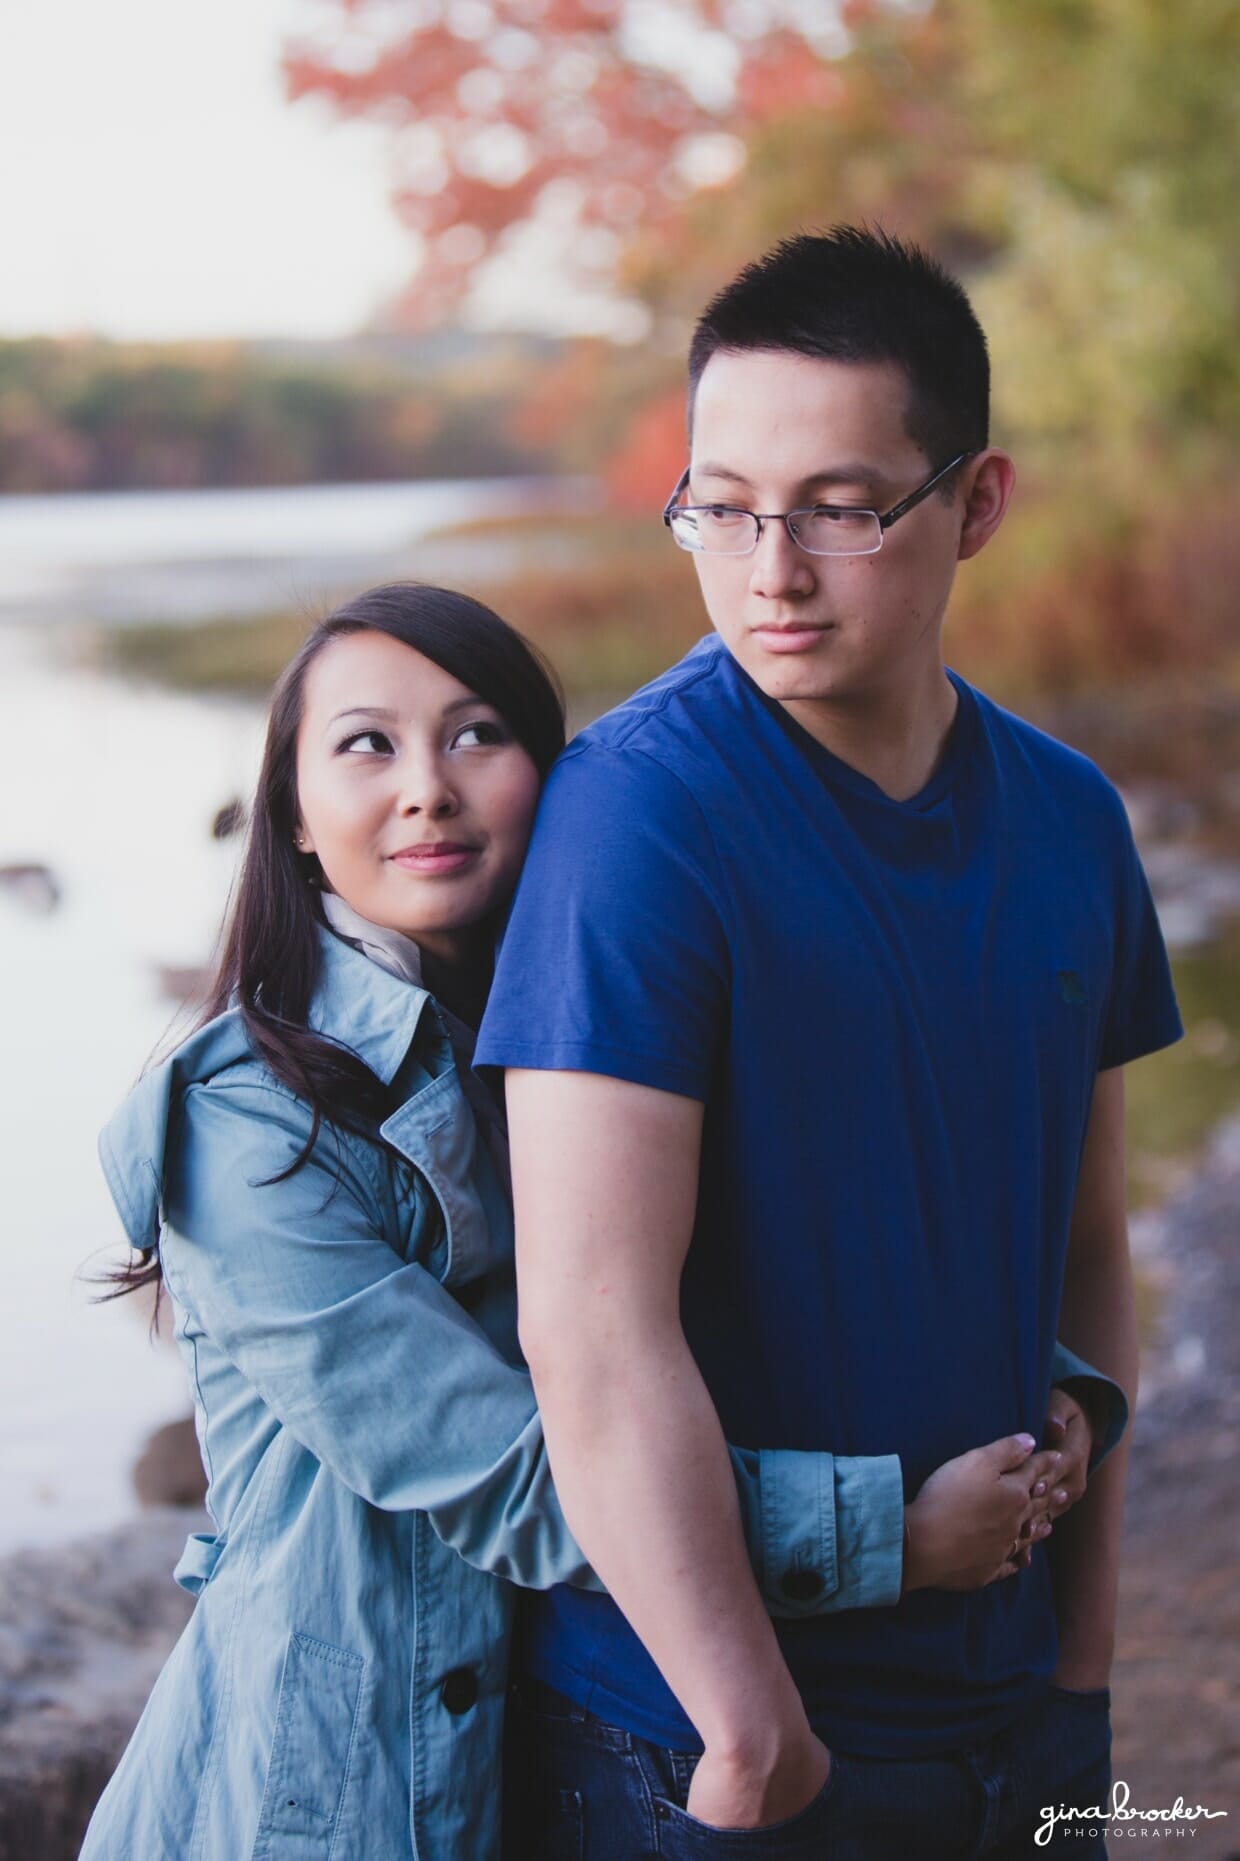 A sweet portrait of a couple along the charles river during their fall engagement session in boston